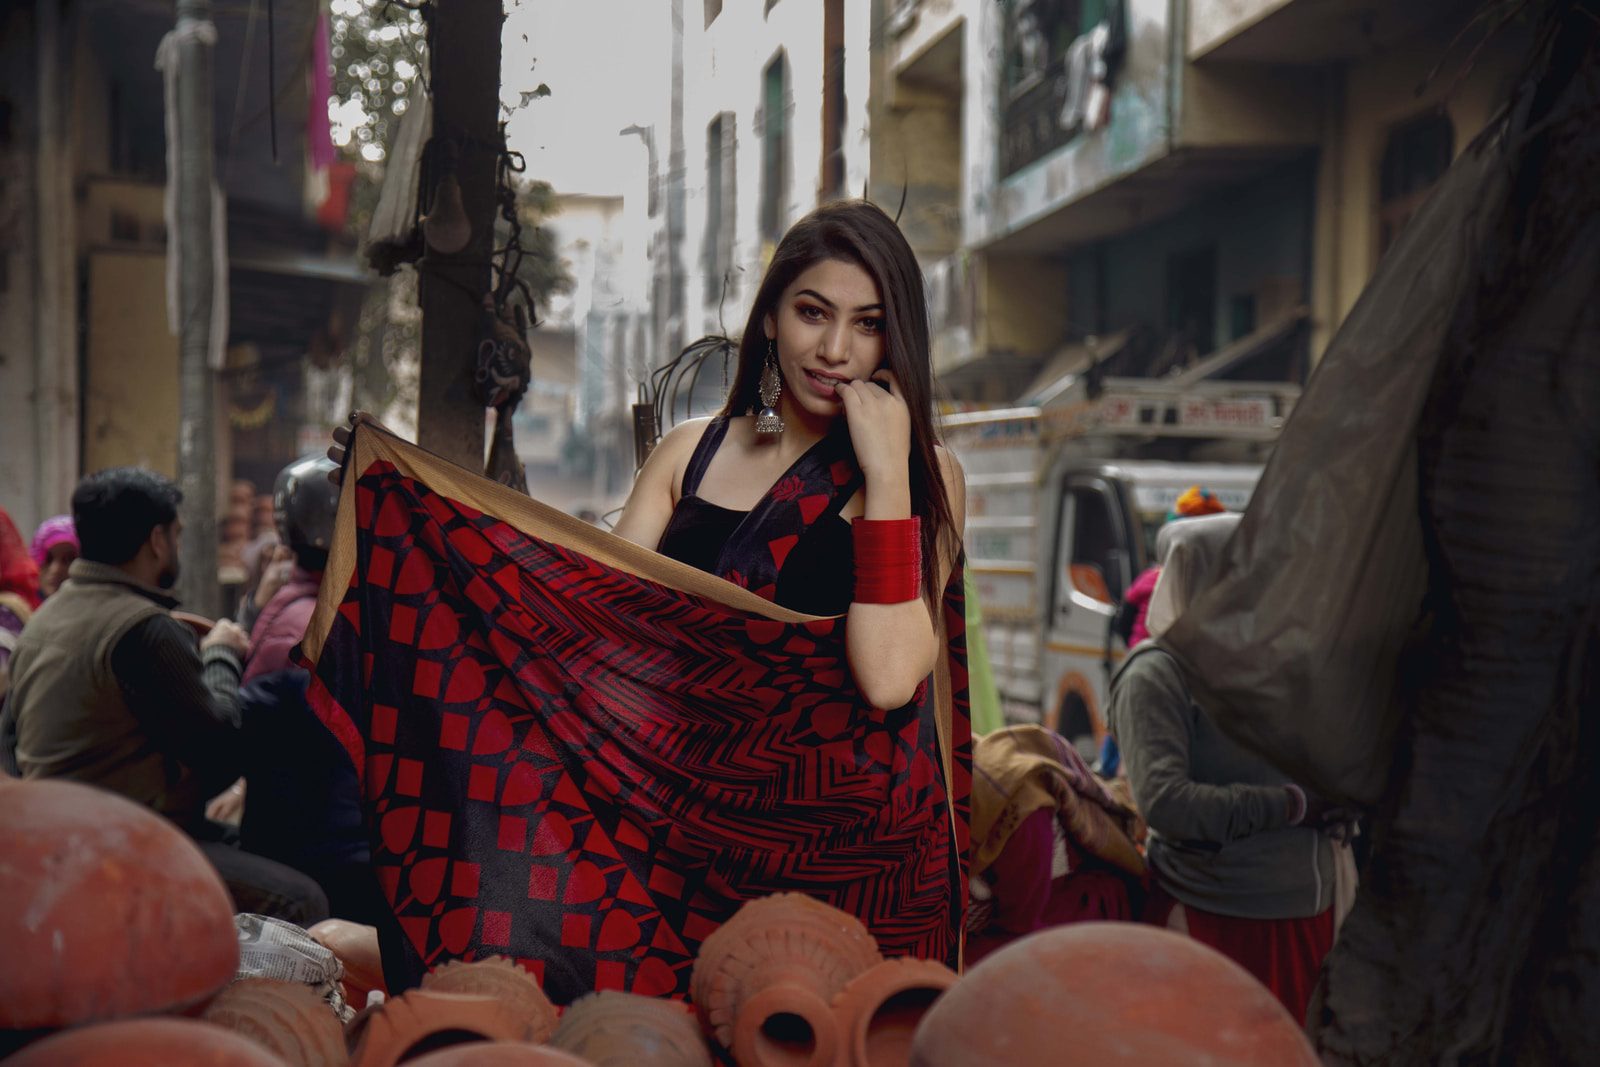 woman standing holding red and black textile near people and vehicles